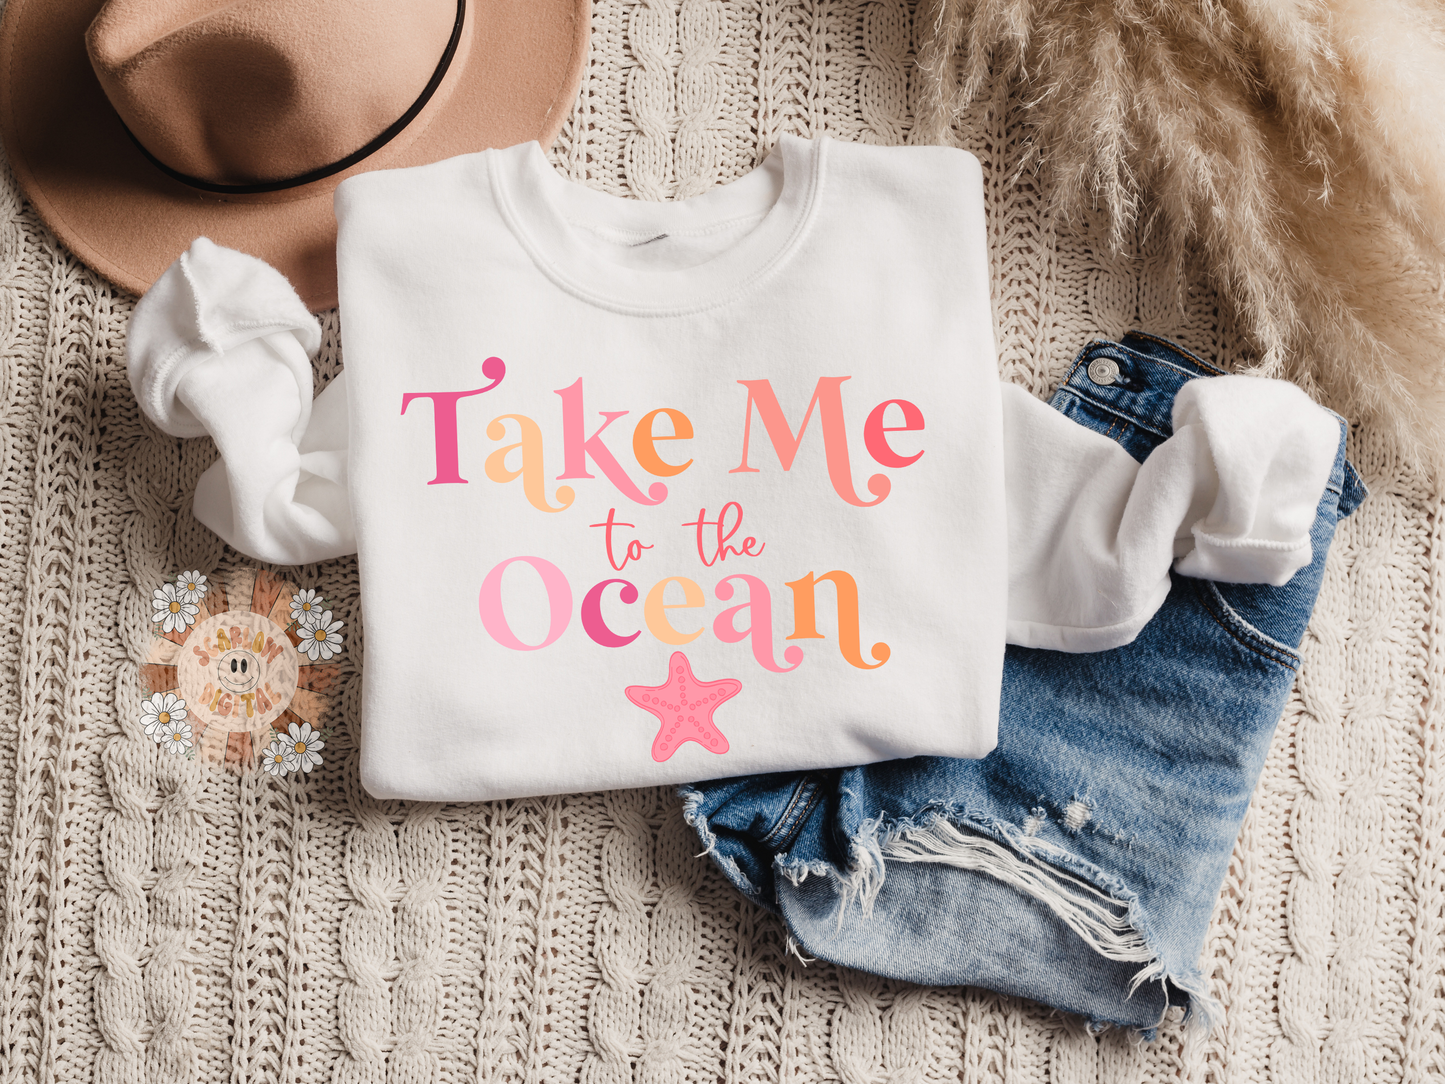 Take Me to the Ocean PNG-Summer Sublimation Digital Design Download-beachy png, girl png, little girl designs, star fish png, ocean png